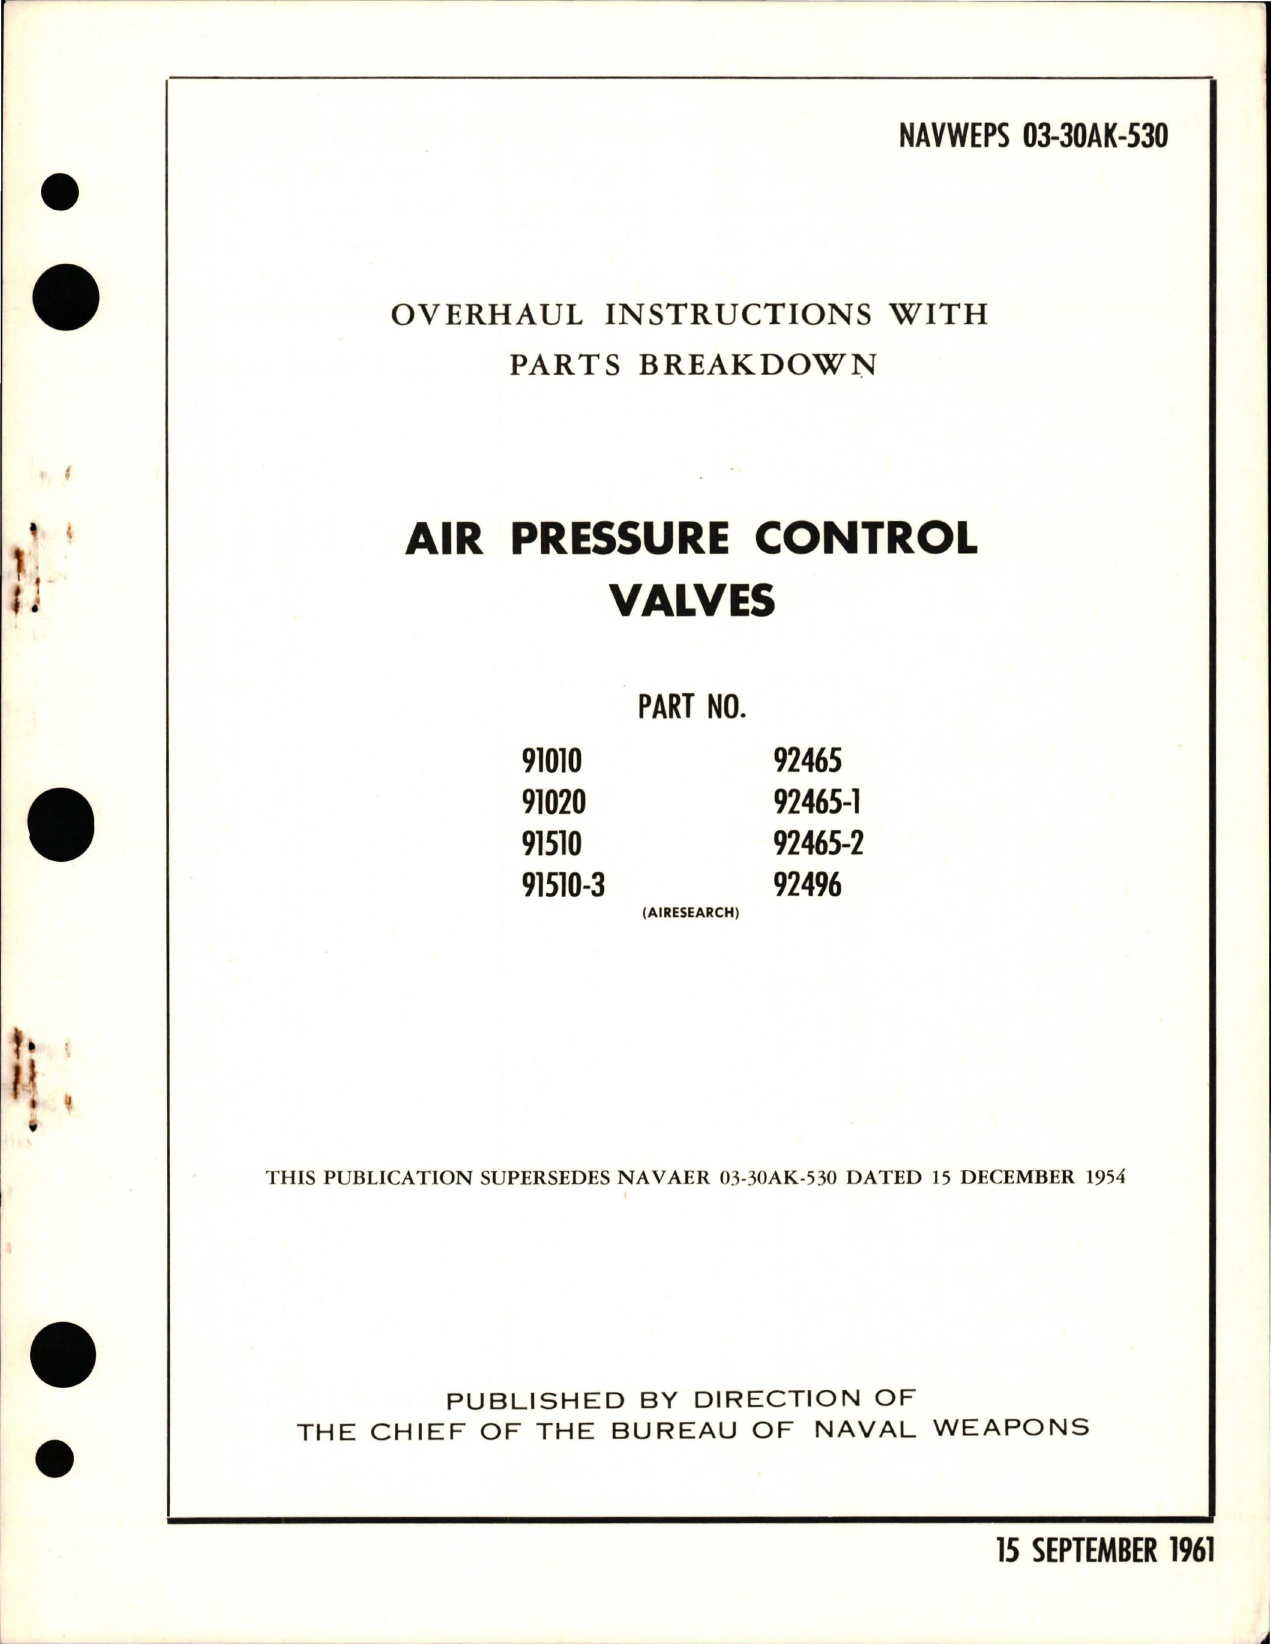 Sample page 1 from AirCorps Library document: Overhaul Instructions with Parts Breakdown for Air Pressure Control Valves